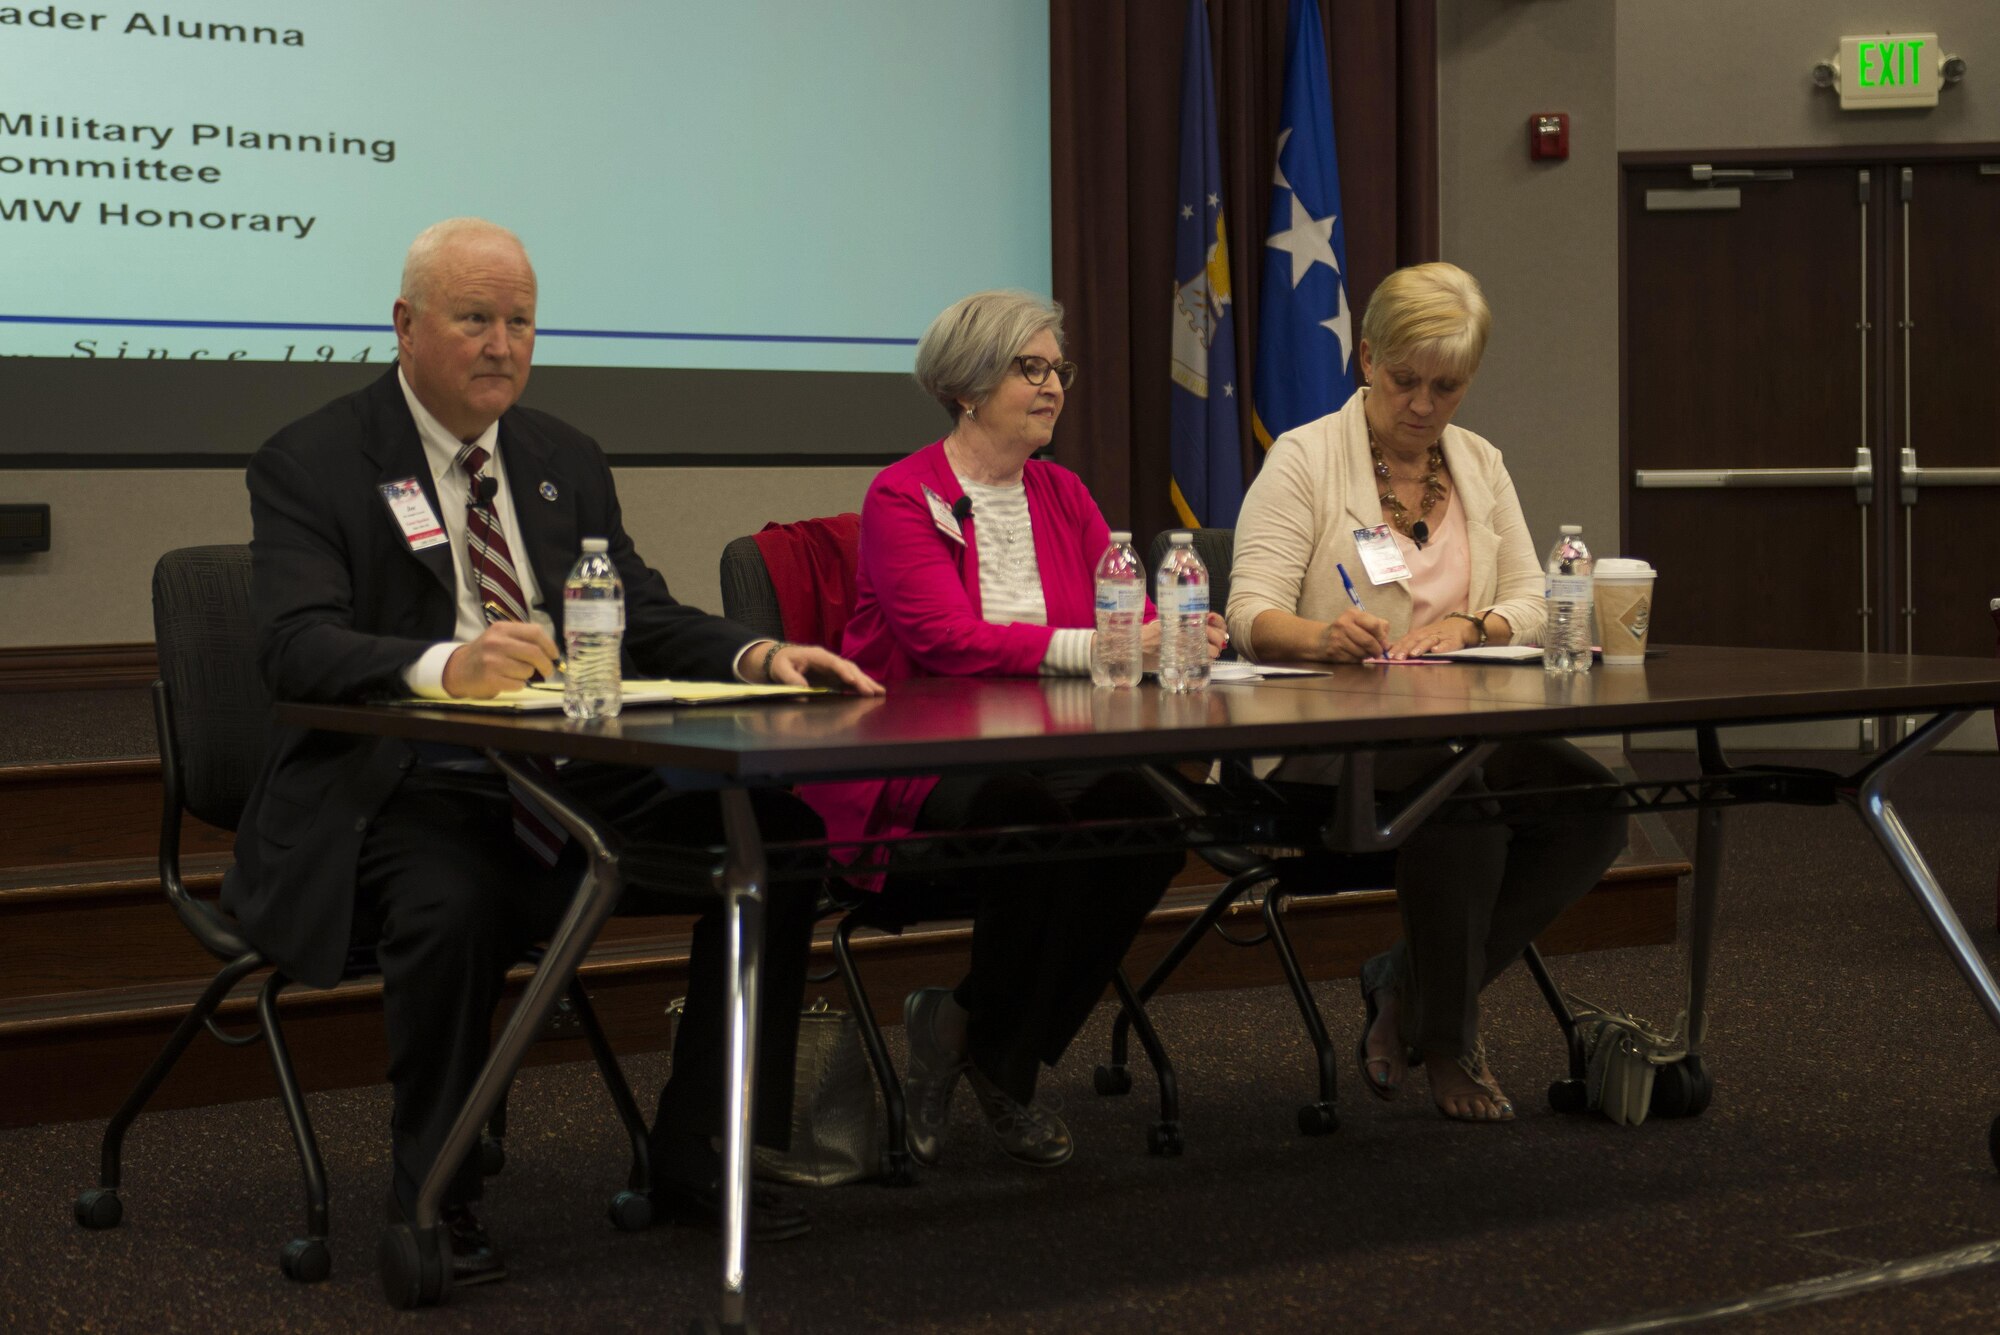 Dr. Joe Leverett, Pat Gallagher and Janet Cowley answer questions during a civic leader panel as part of Phoenix Rally at Scott Air Force Base, Illinois, April 28, 2017. The civic leader panel emphasized the role civic leaders and honorary commanders play in their respective communities. (U.S. Air Force photo by Staff Sgt. Clayton Lenhardt)